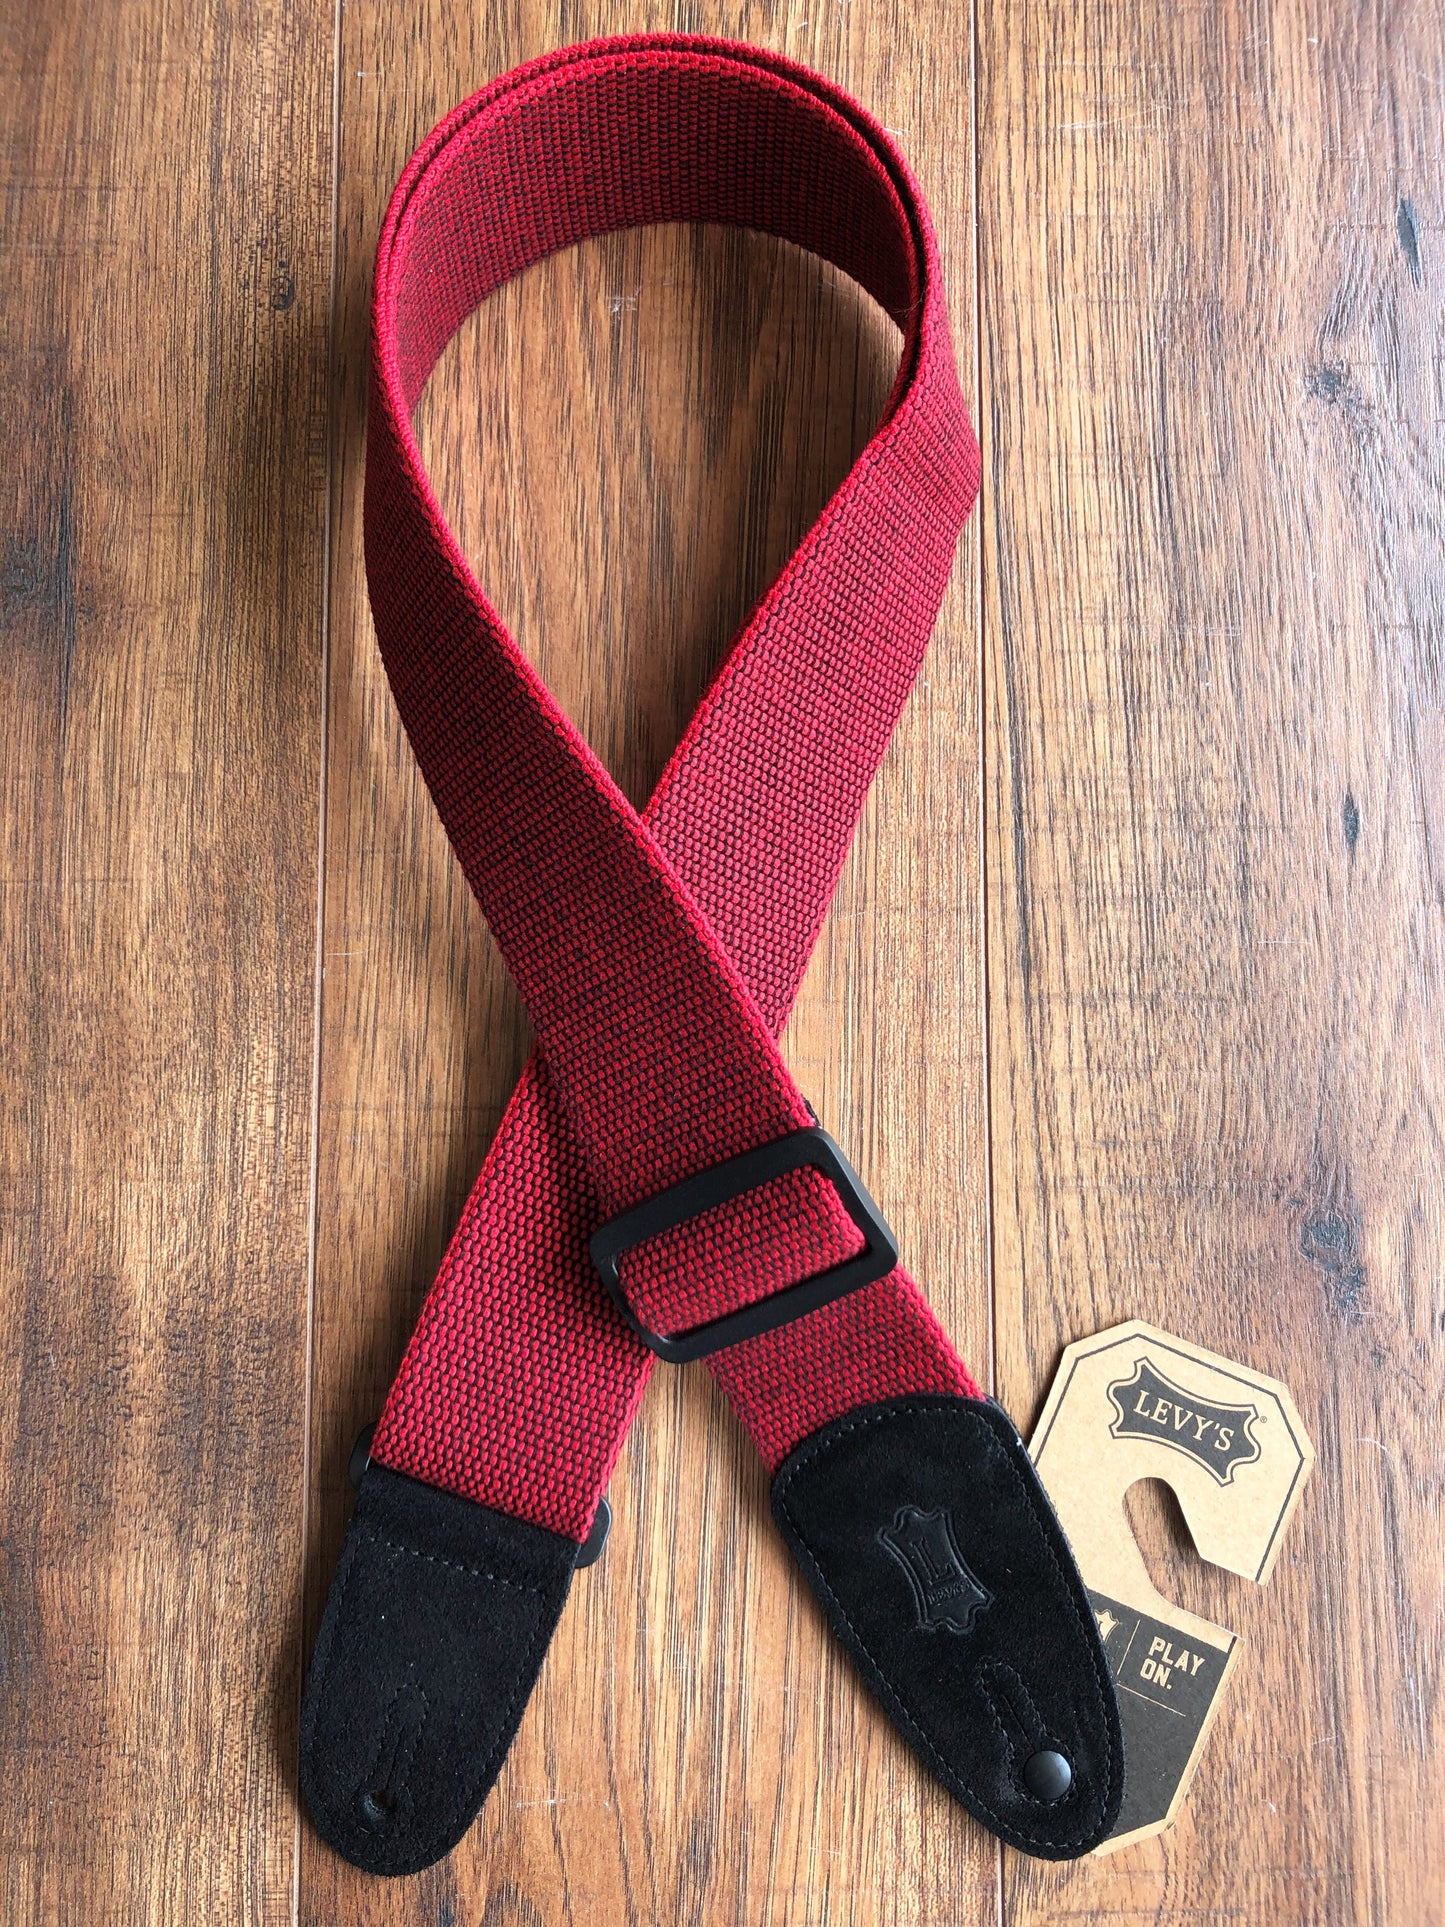 Levy's MT8-RED 2" Adjustable Tweed Guitar & Bass Strap Red